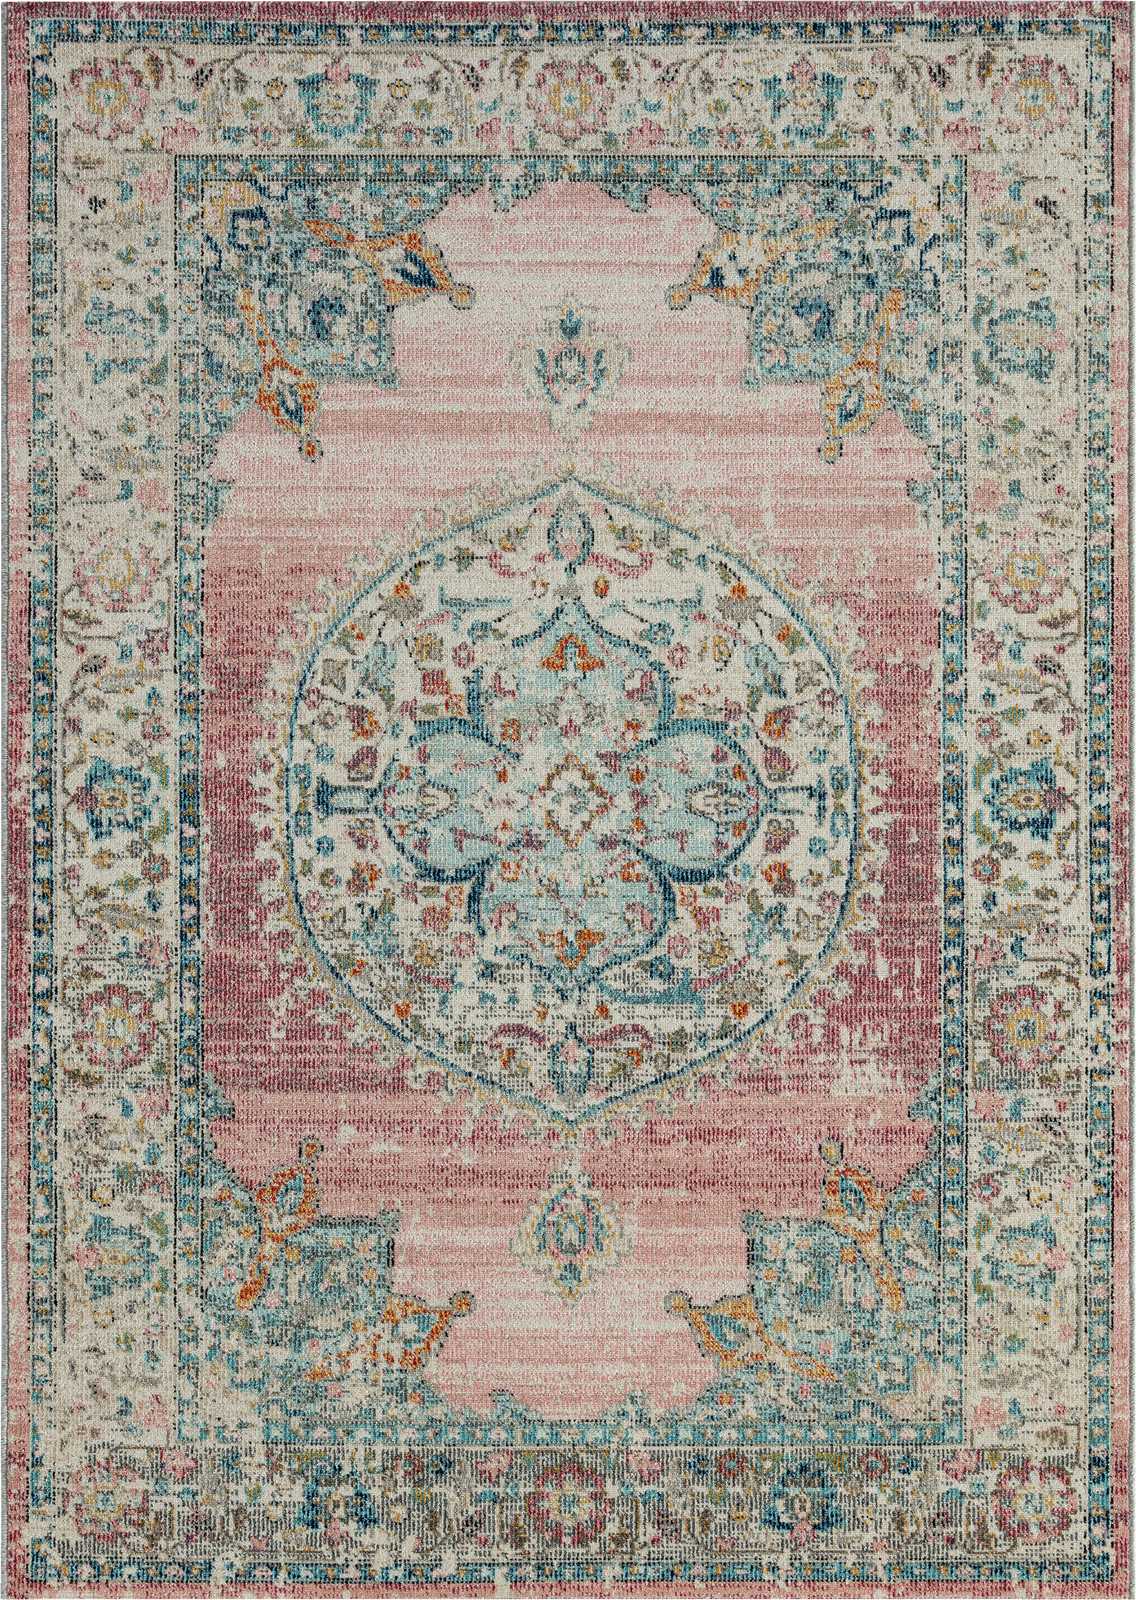             Flatweave Outdoor Rug with Pink Accents - 170 x 120 cm
        